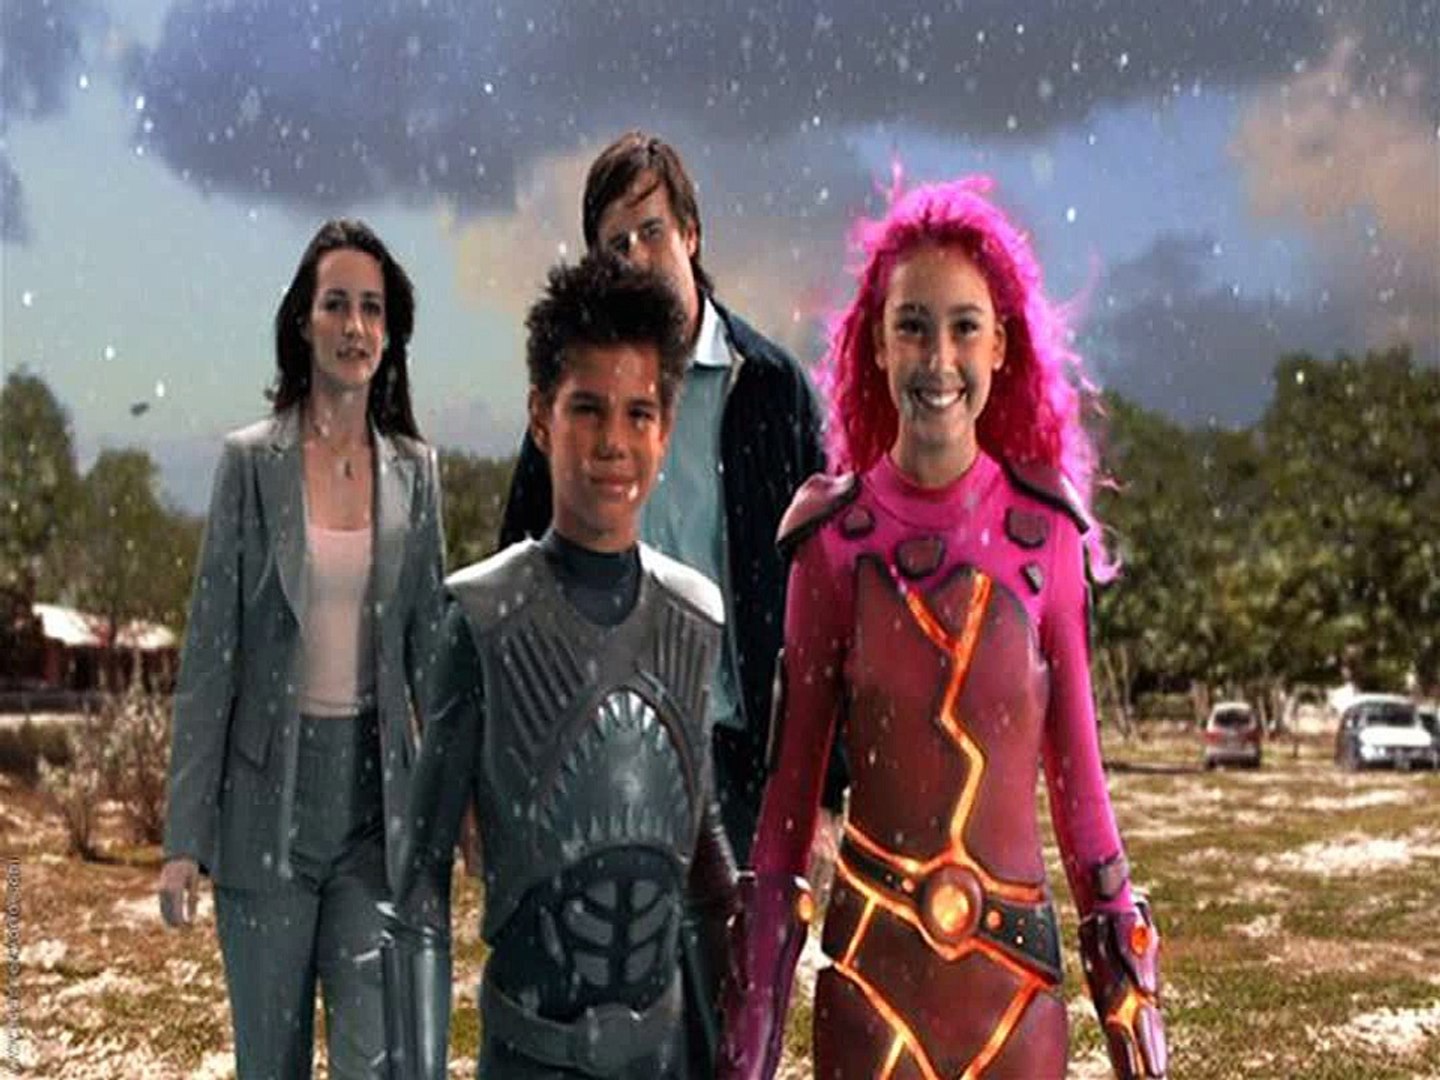 The Adventures of Sharkboy and Lavagirl 3